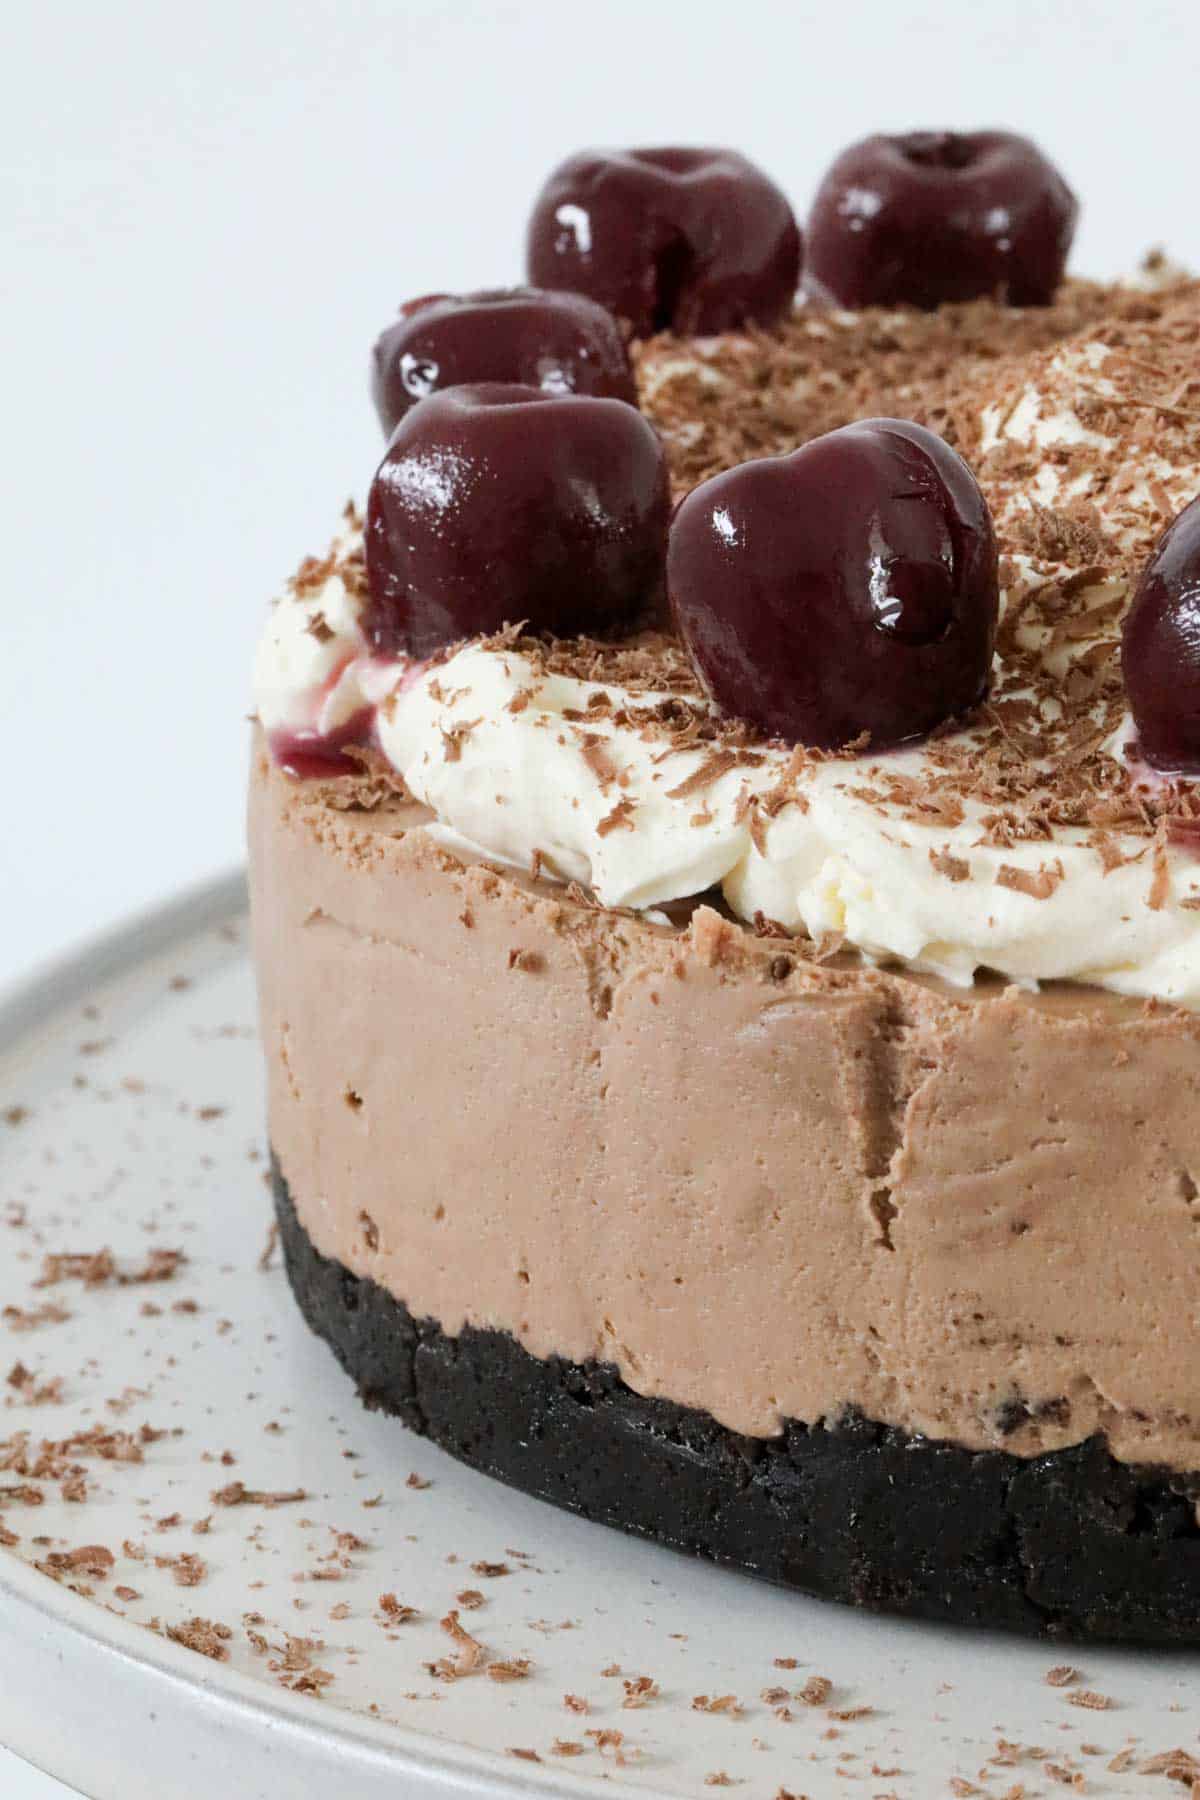 A close up of the side of a decorated Black Forest cheesecake.